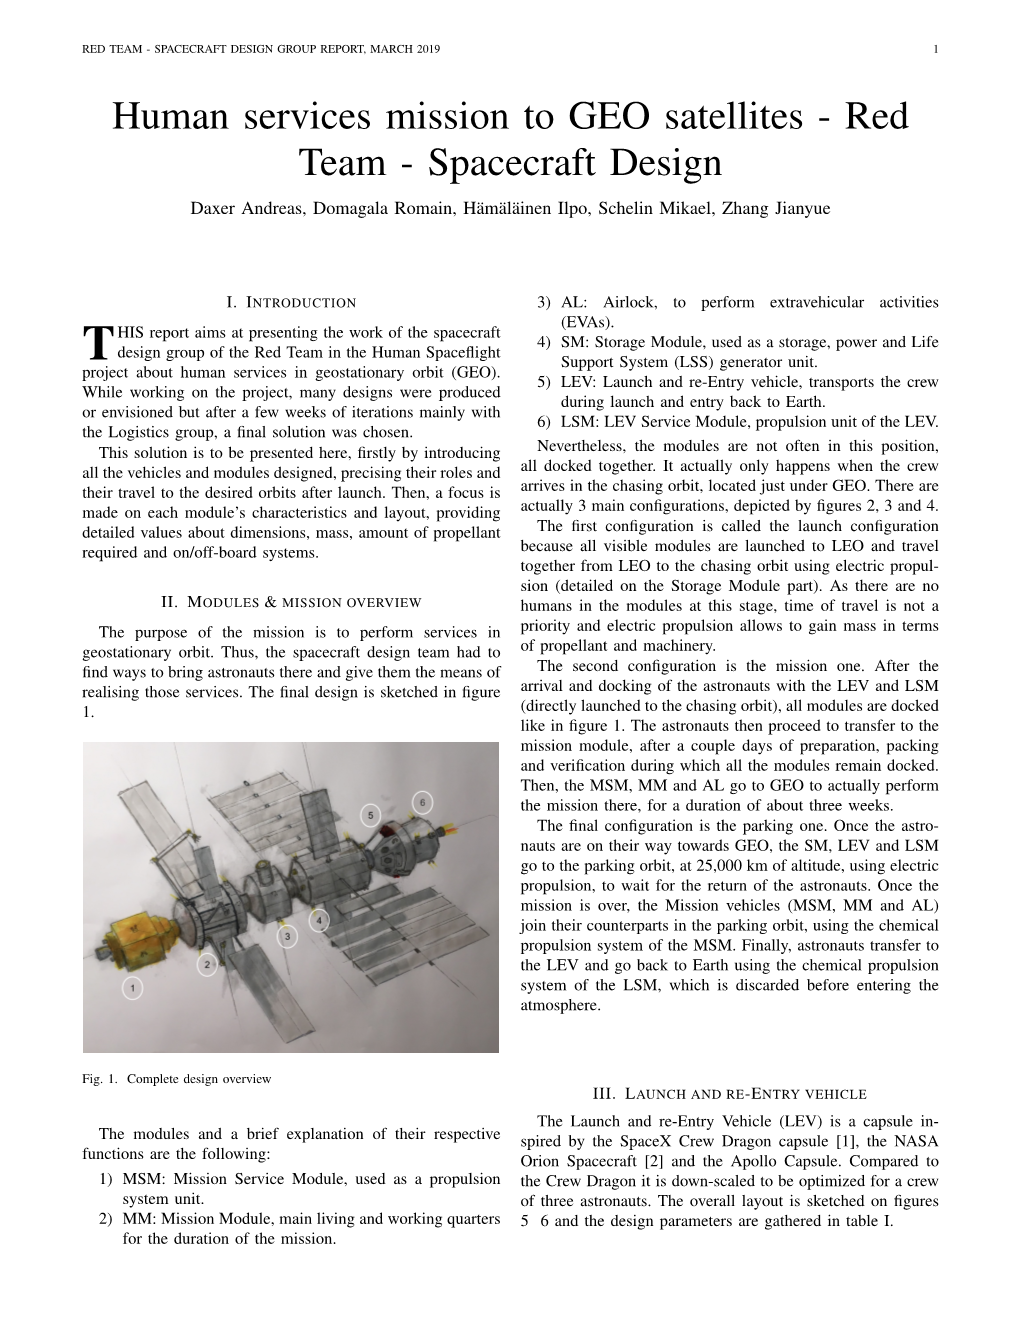 Human Services Mission to GEO Satellites - Red Team - Spacecraft Design Daxer Andreas, Domagala Romain, Ham¨ Al¨ Ainen¨ Ilpo, Schelin Mikael, Zhang Jianyue